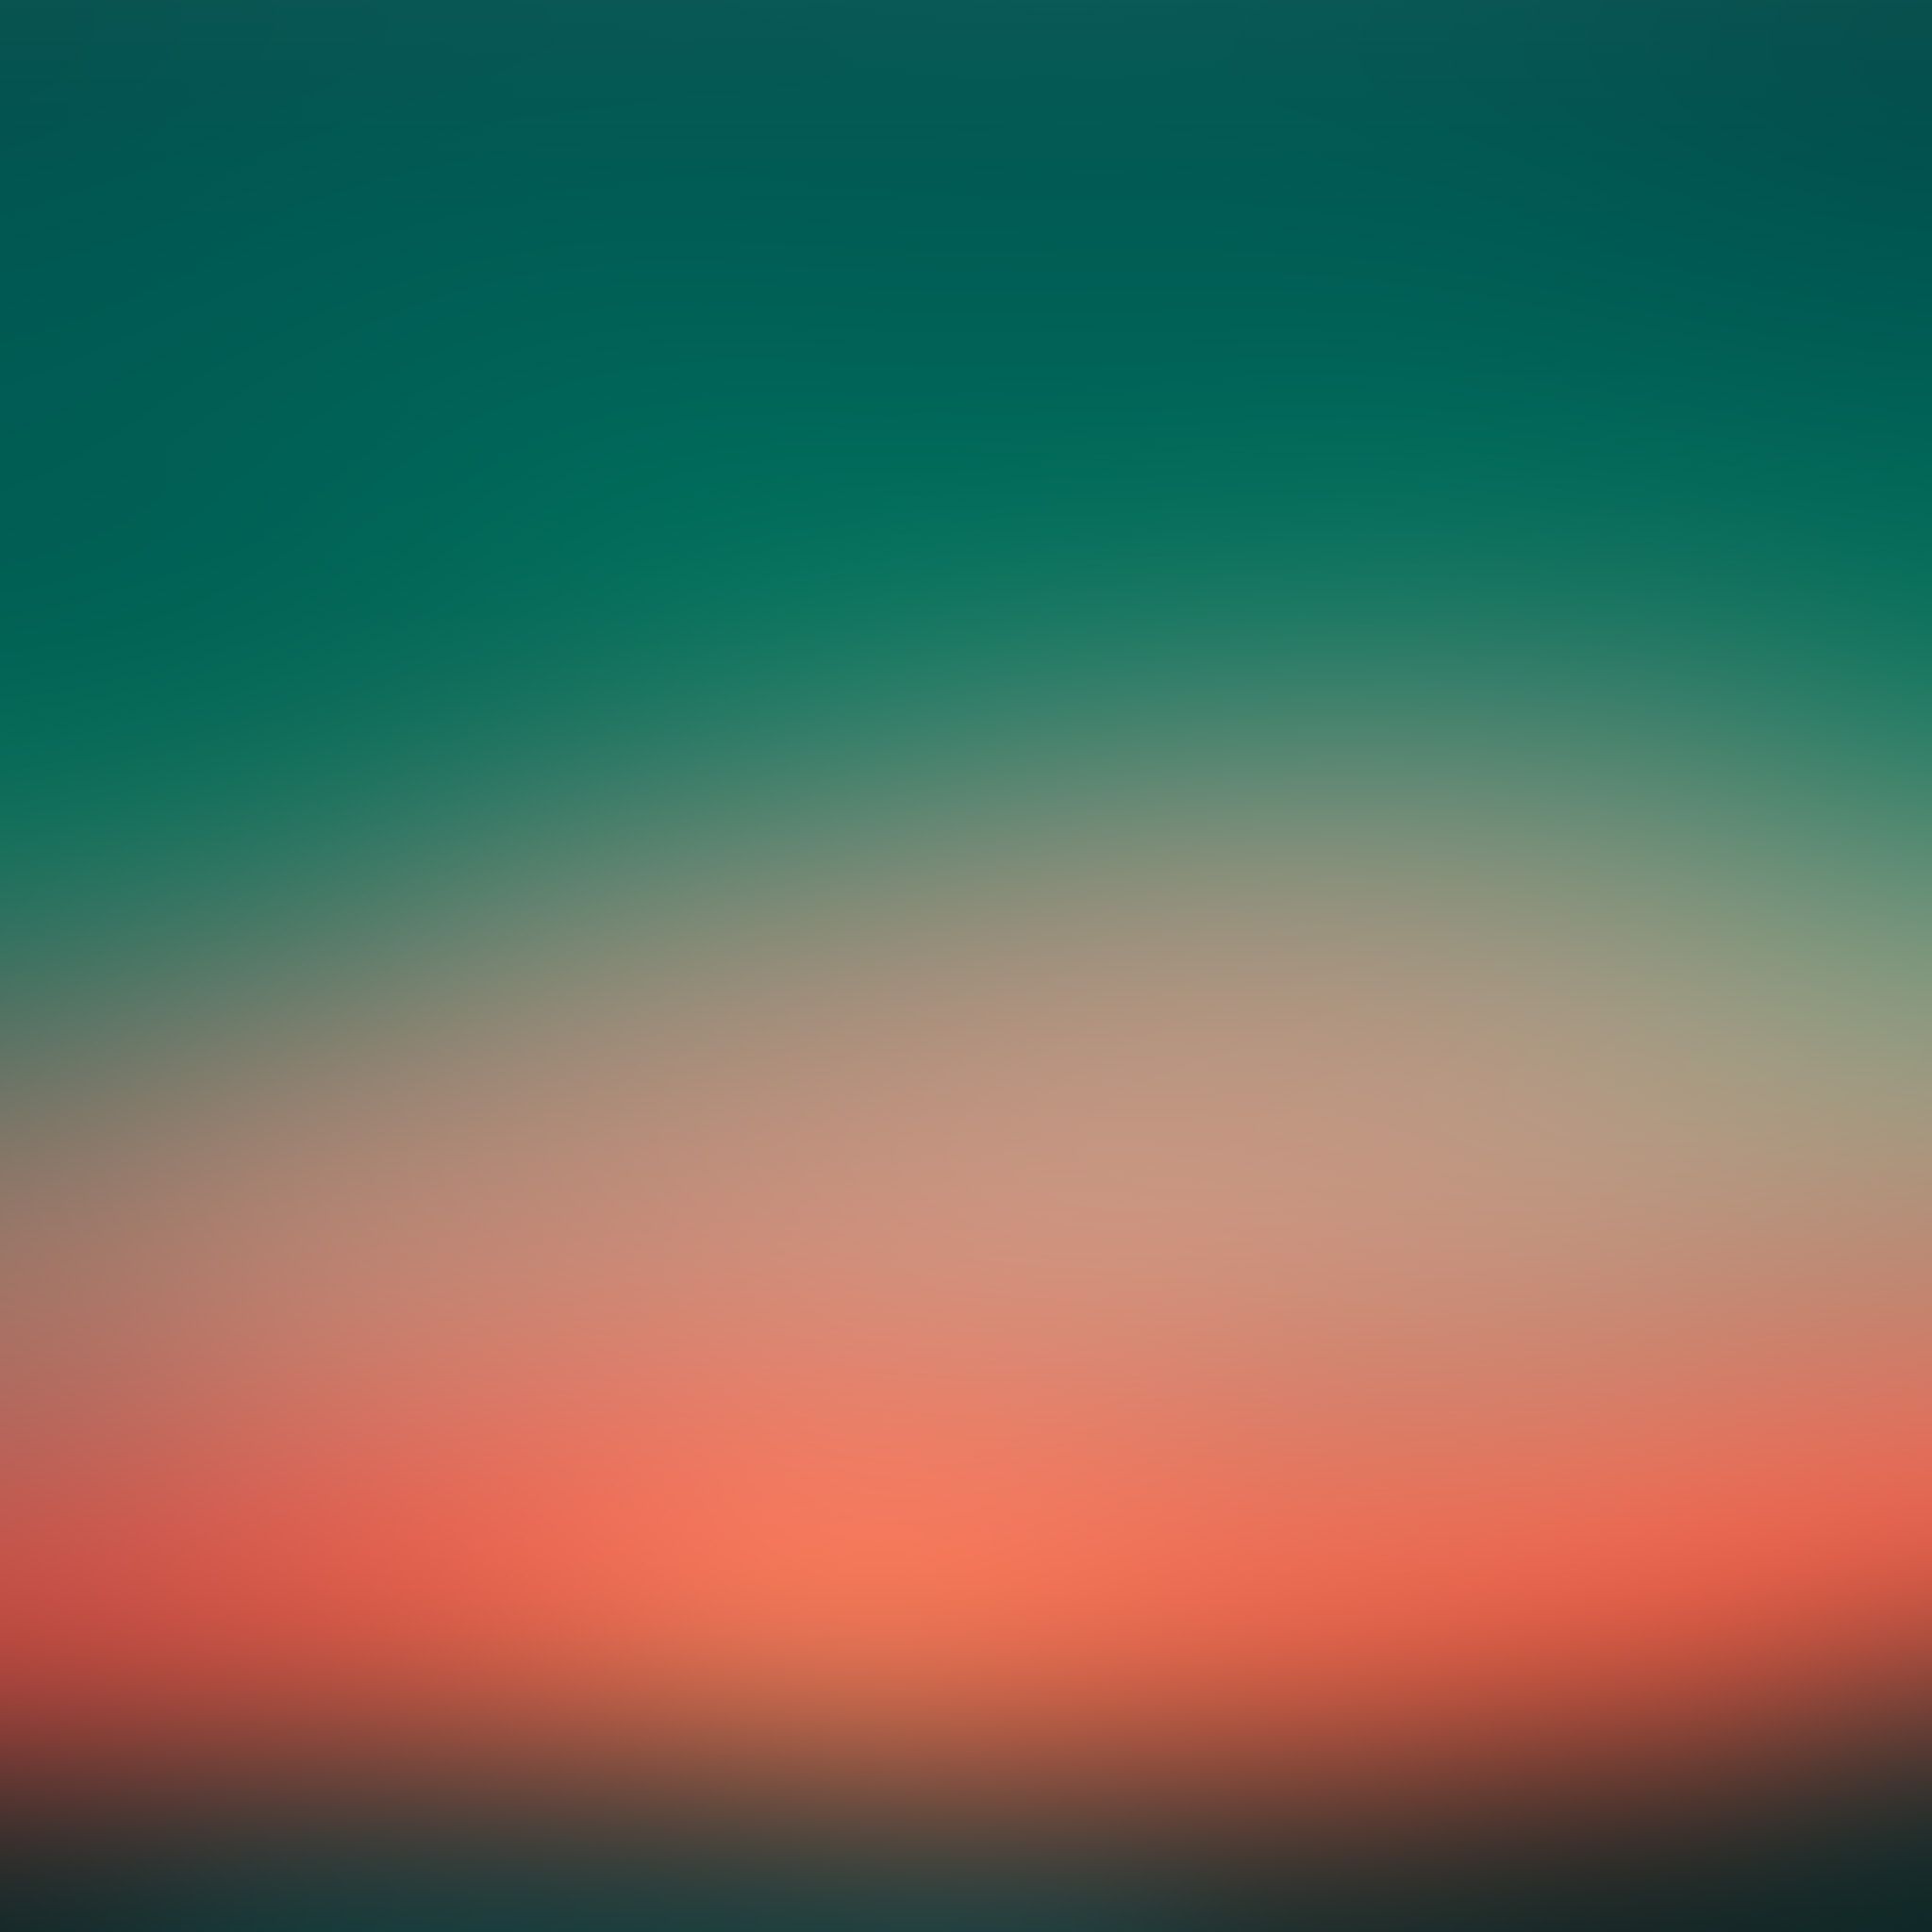 An abstract image of a sunset with a green and orange gradient. - Blurry